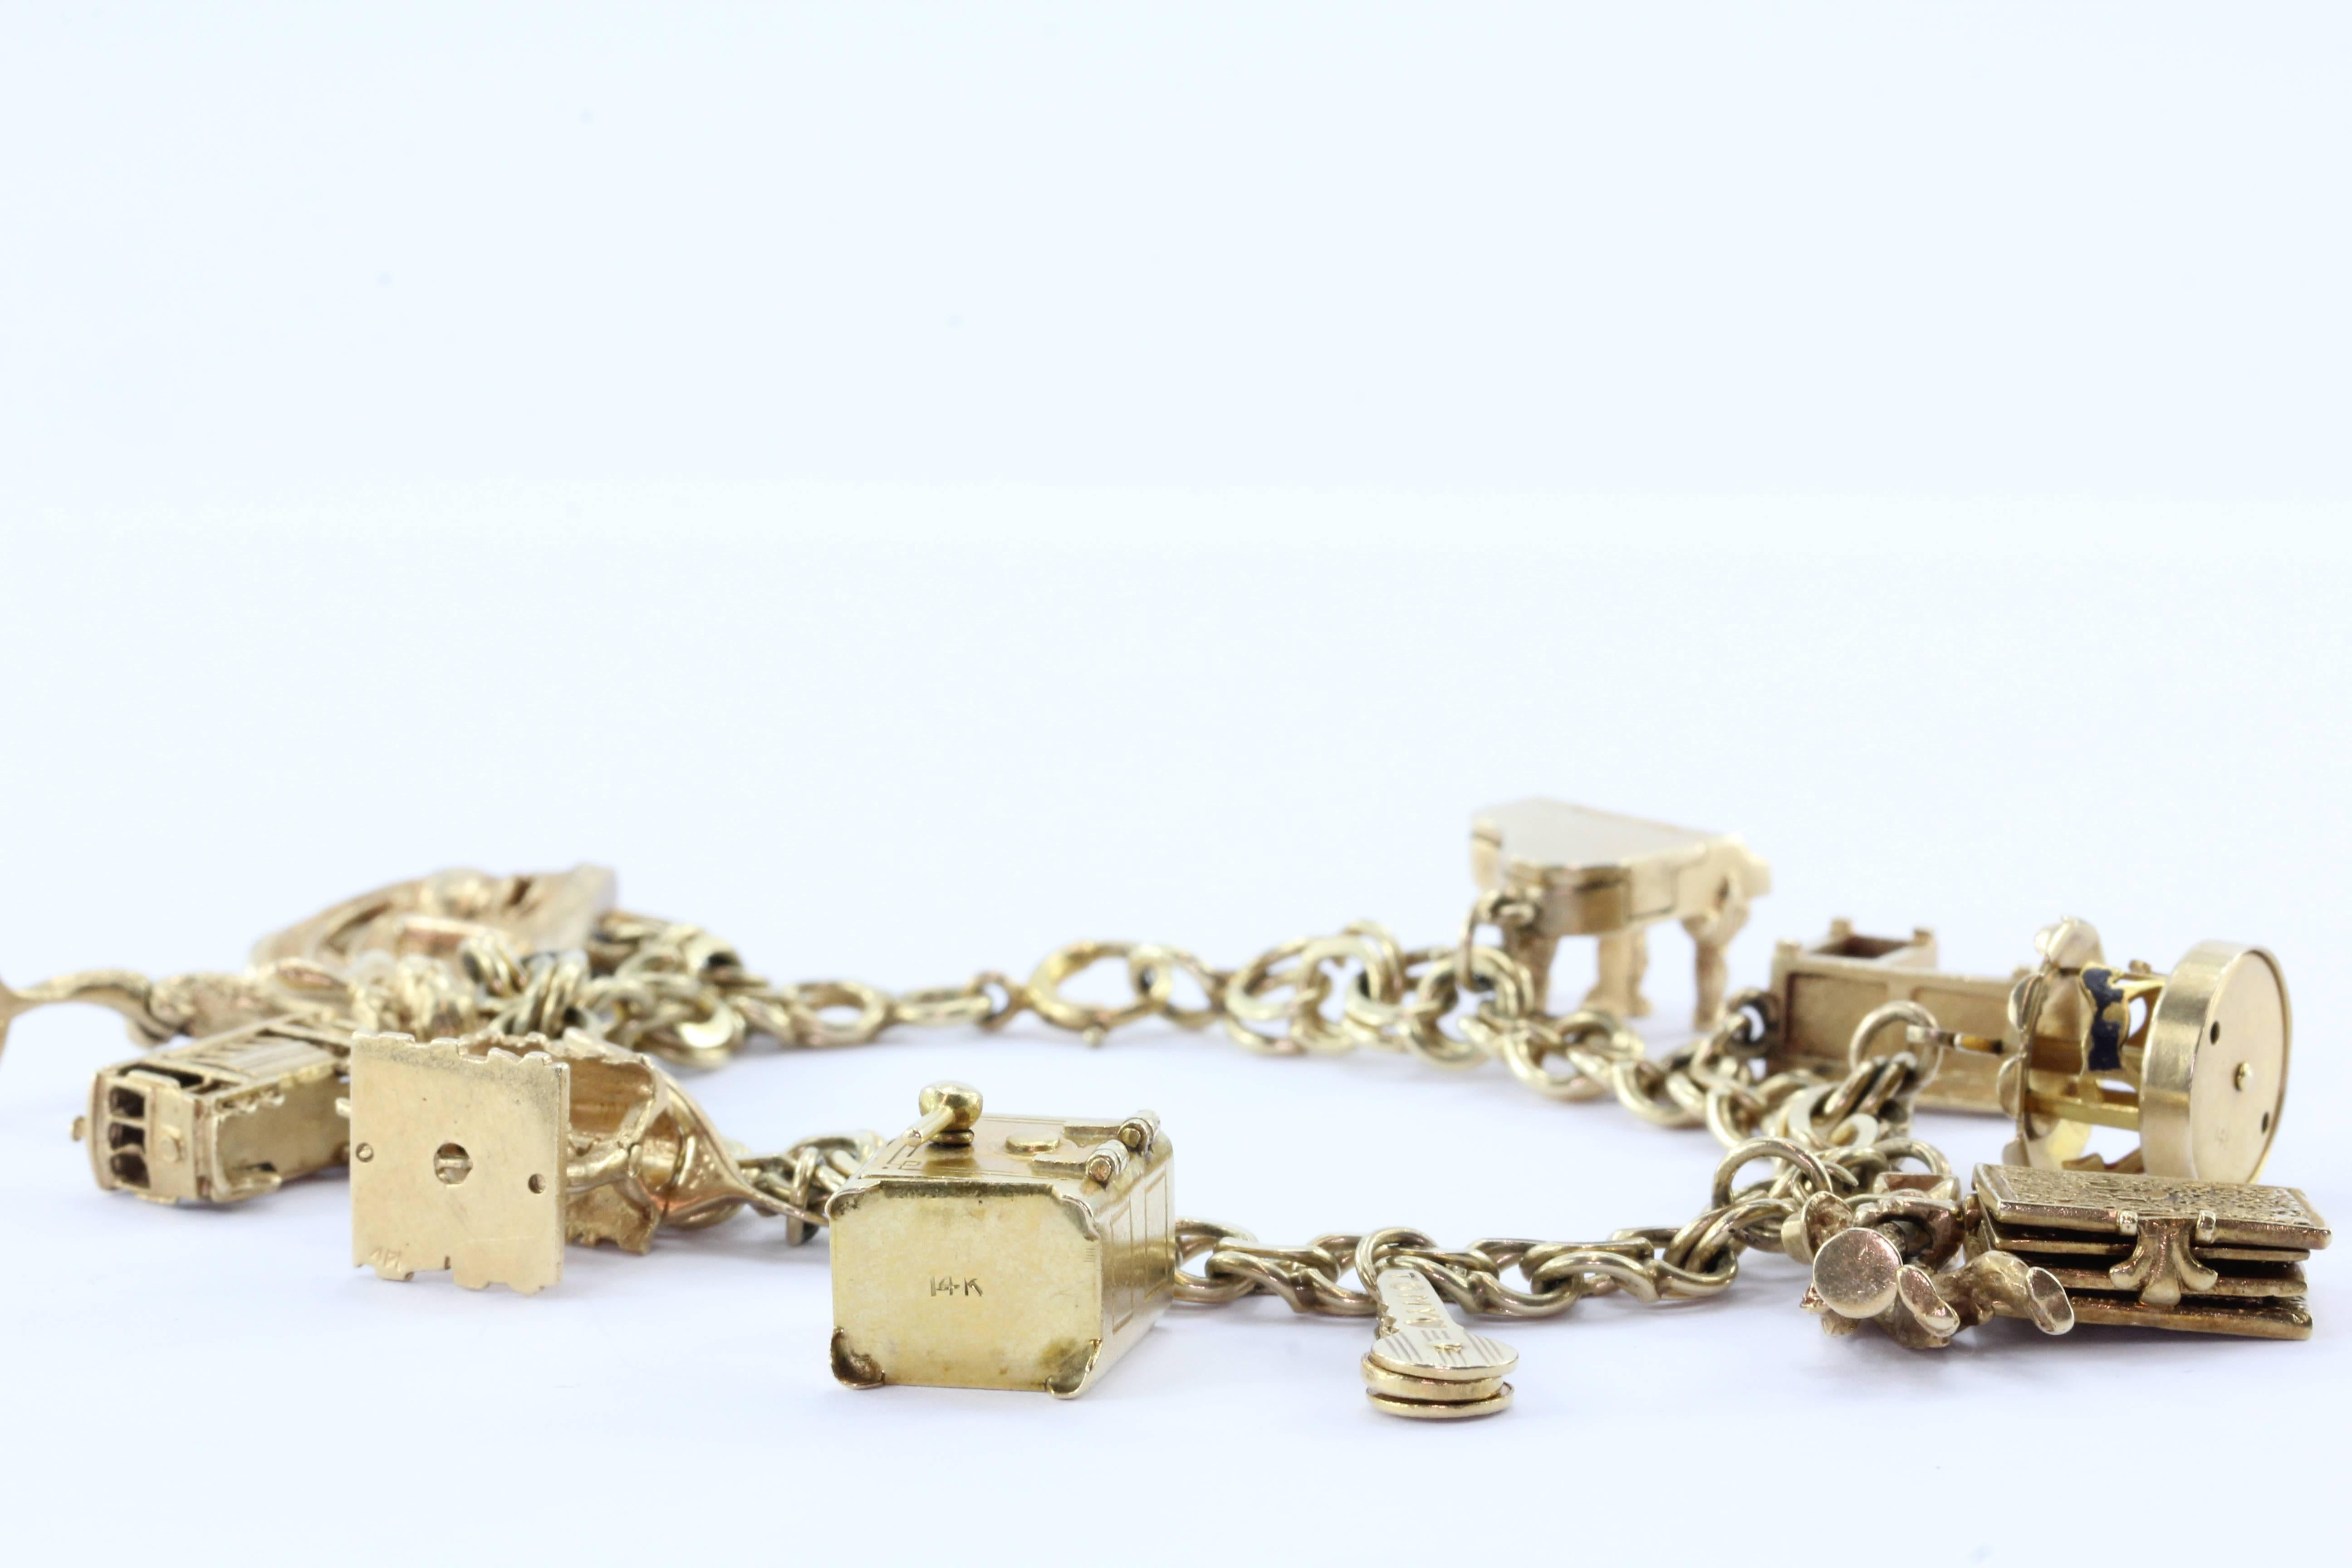 14K Gold 12 Movable Charms Charm Bracelet Circa 1950's. The piece is in excellent estate condition and ready to wear. All but two of the charms have pieces that move. The bracelet and all of the charms are hallmarked 14K. The bracelet measures